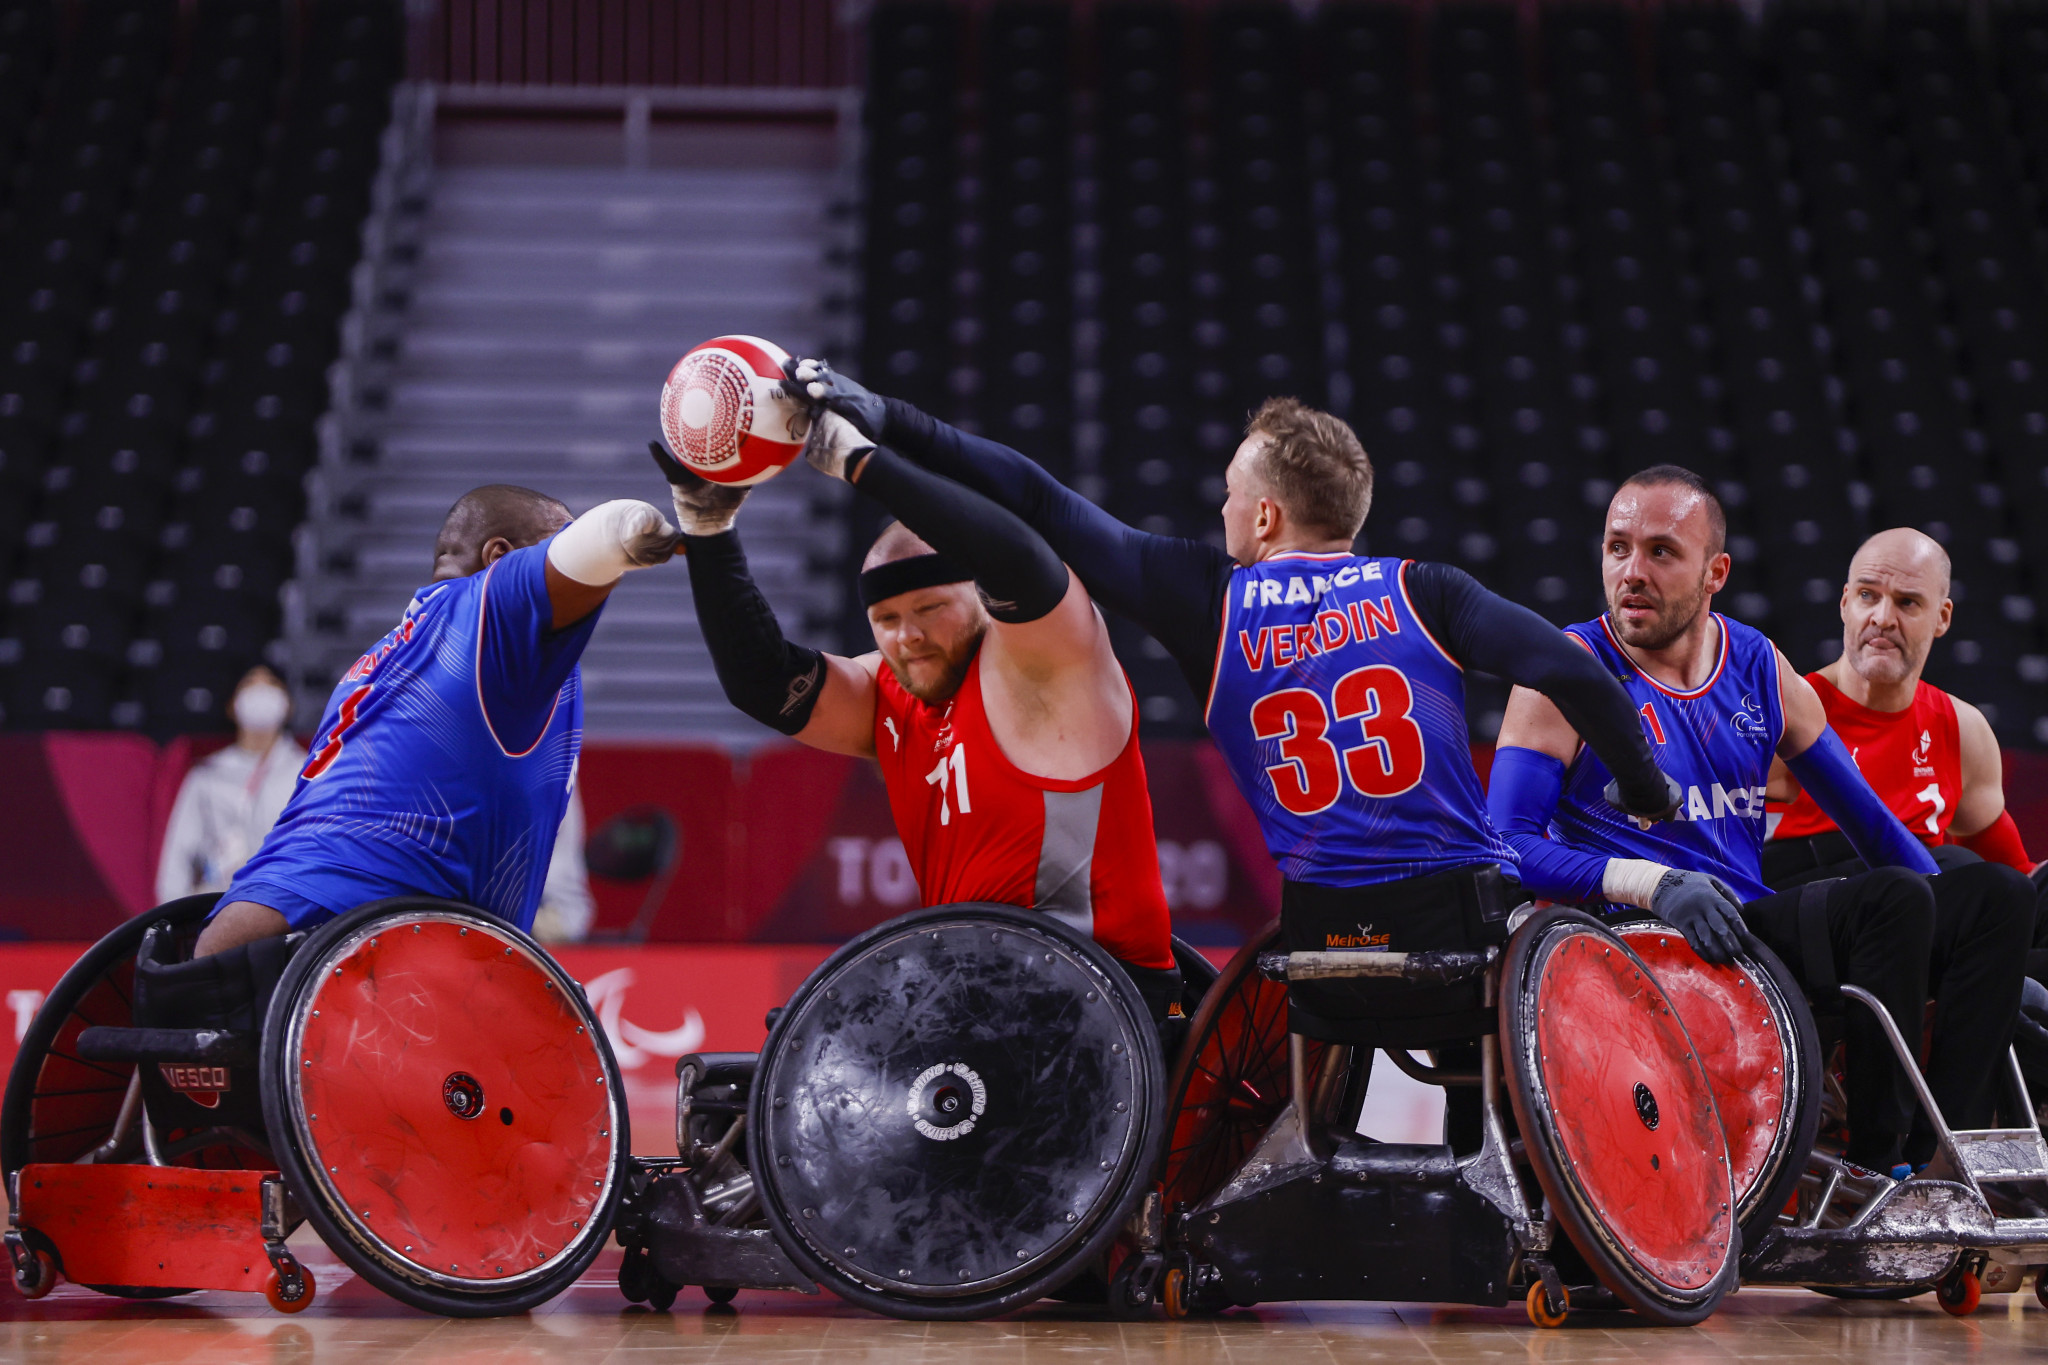 The eight best teams in the world will be invited to play at the International Wheelchair Rugby Cup ©Getty Images